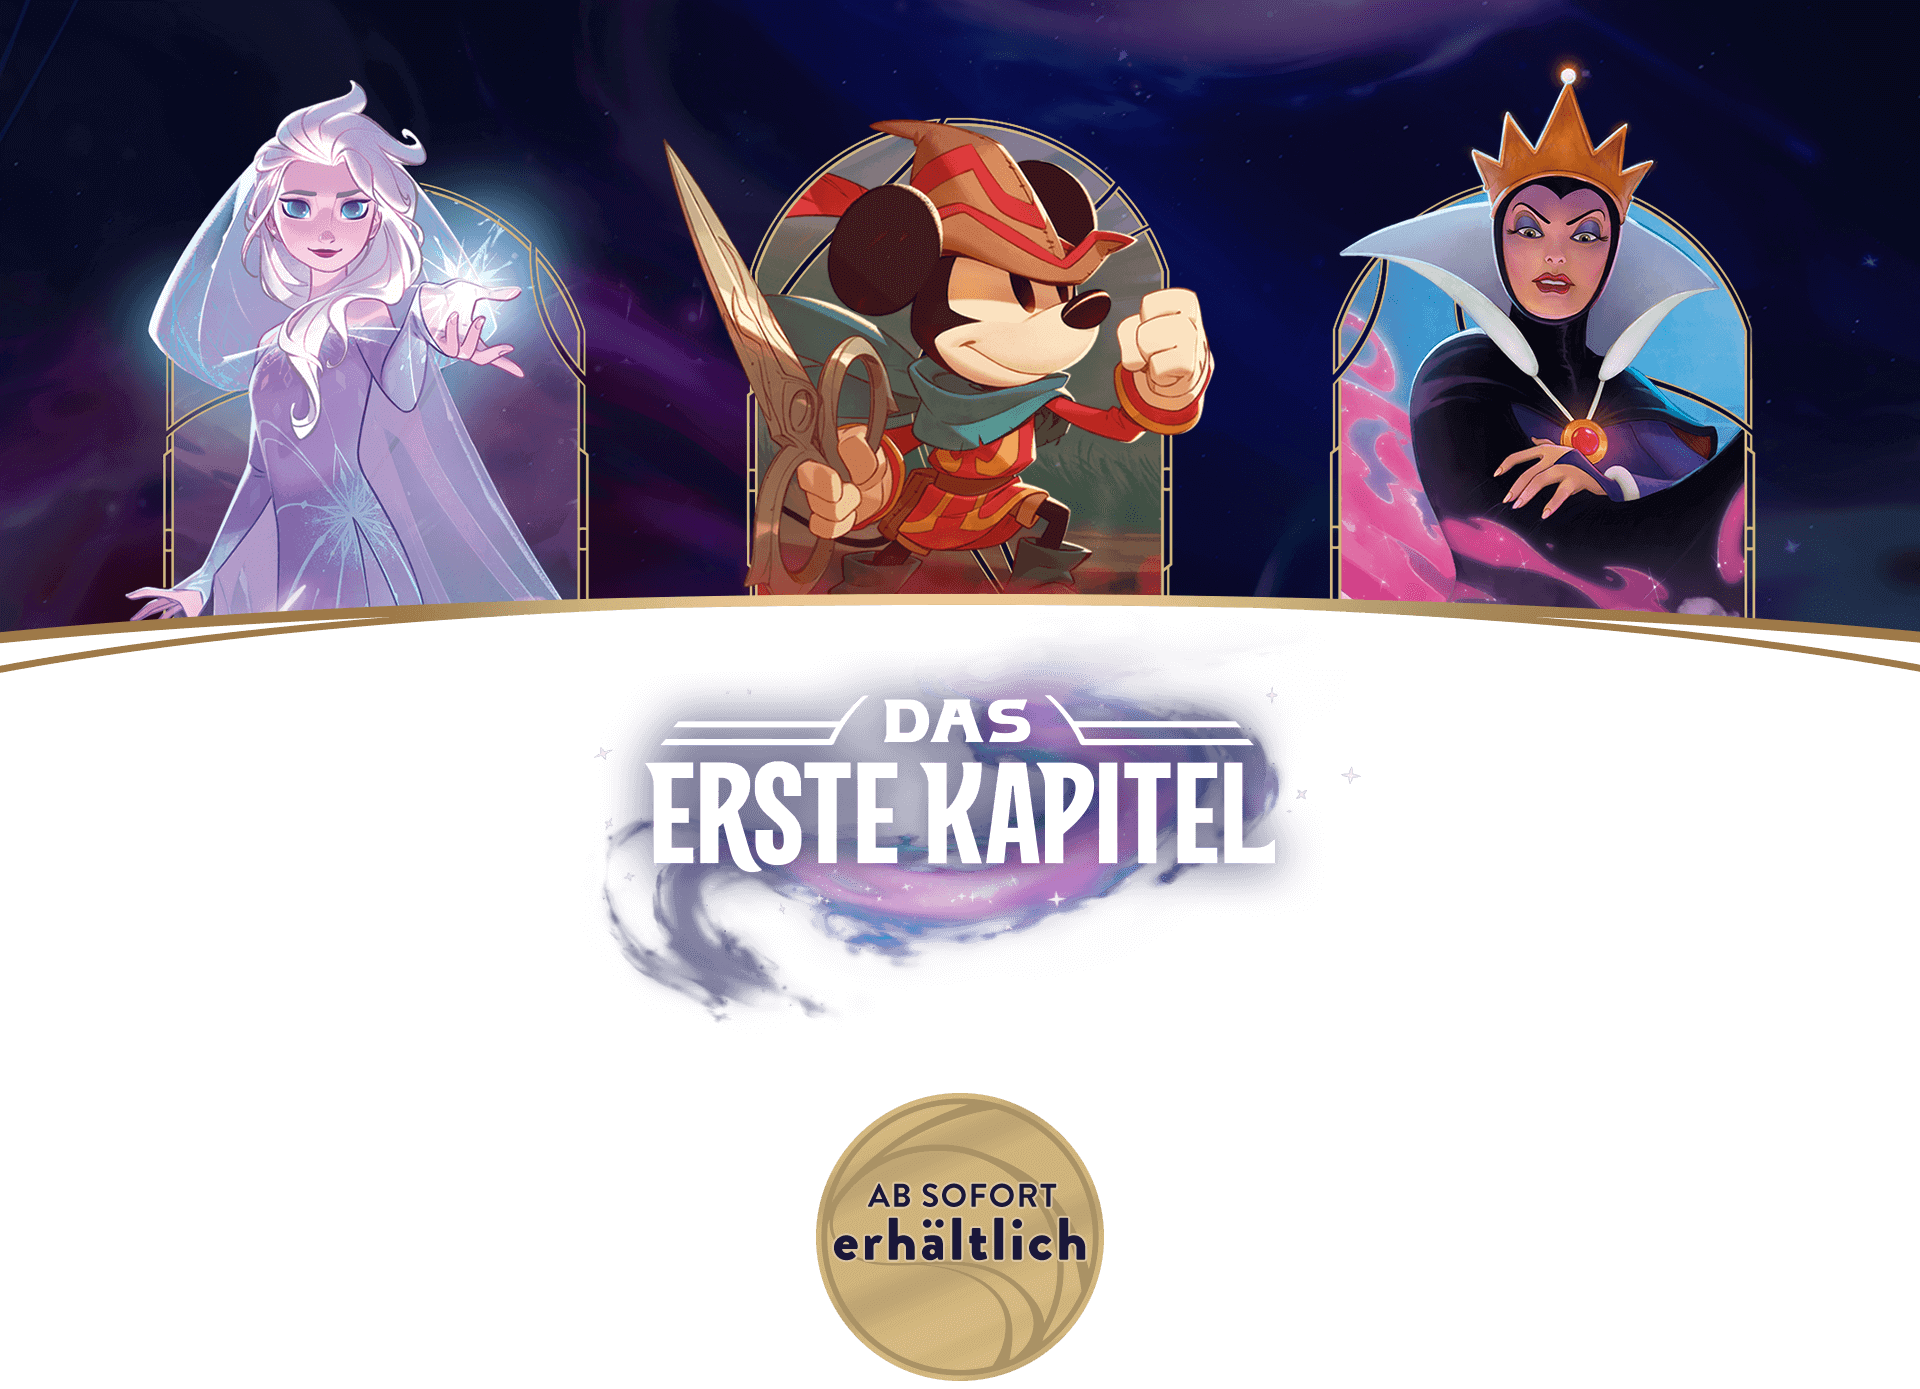 Decorative header image showing three characters (left to right: elsa, mickey, queen grimhilde) and a logo that says DAS ERSTE KAPITEL.